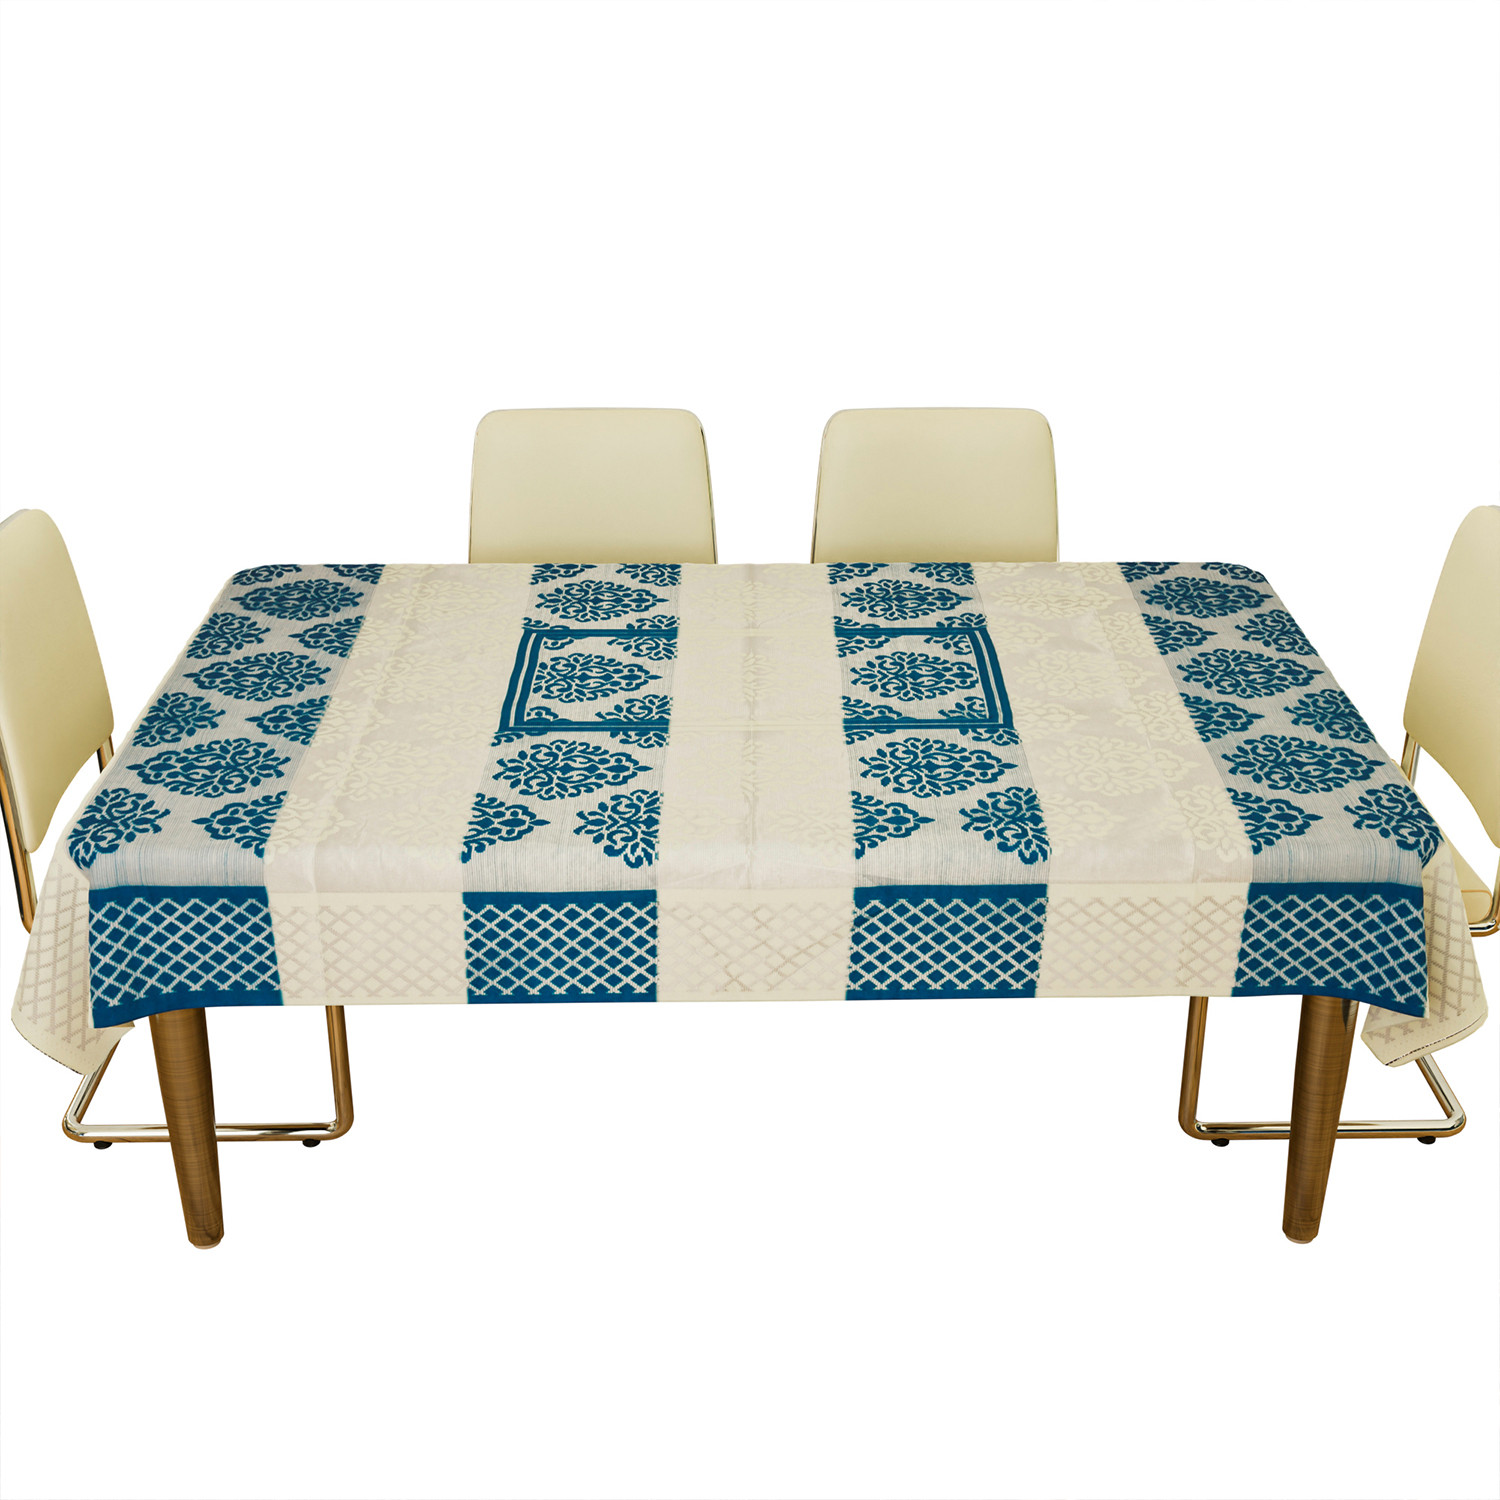 Kuber Industries Dining Table Cover | Kitchen Dining Tablecloth | 6 Seater Dining Table Cover | Dining Table Cover for Hall Décor | Blue Star Patta Net Tablecloth | DTC | 60x90 | Cream